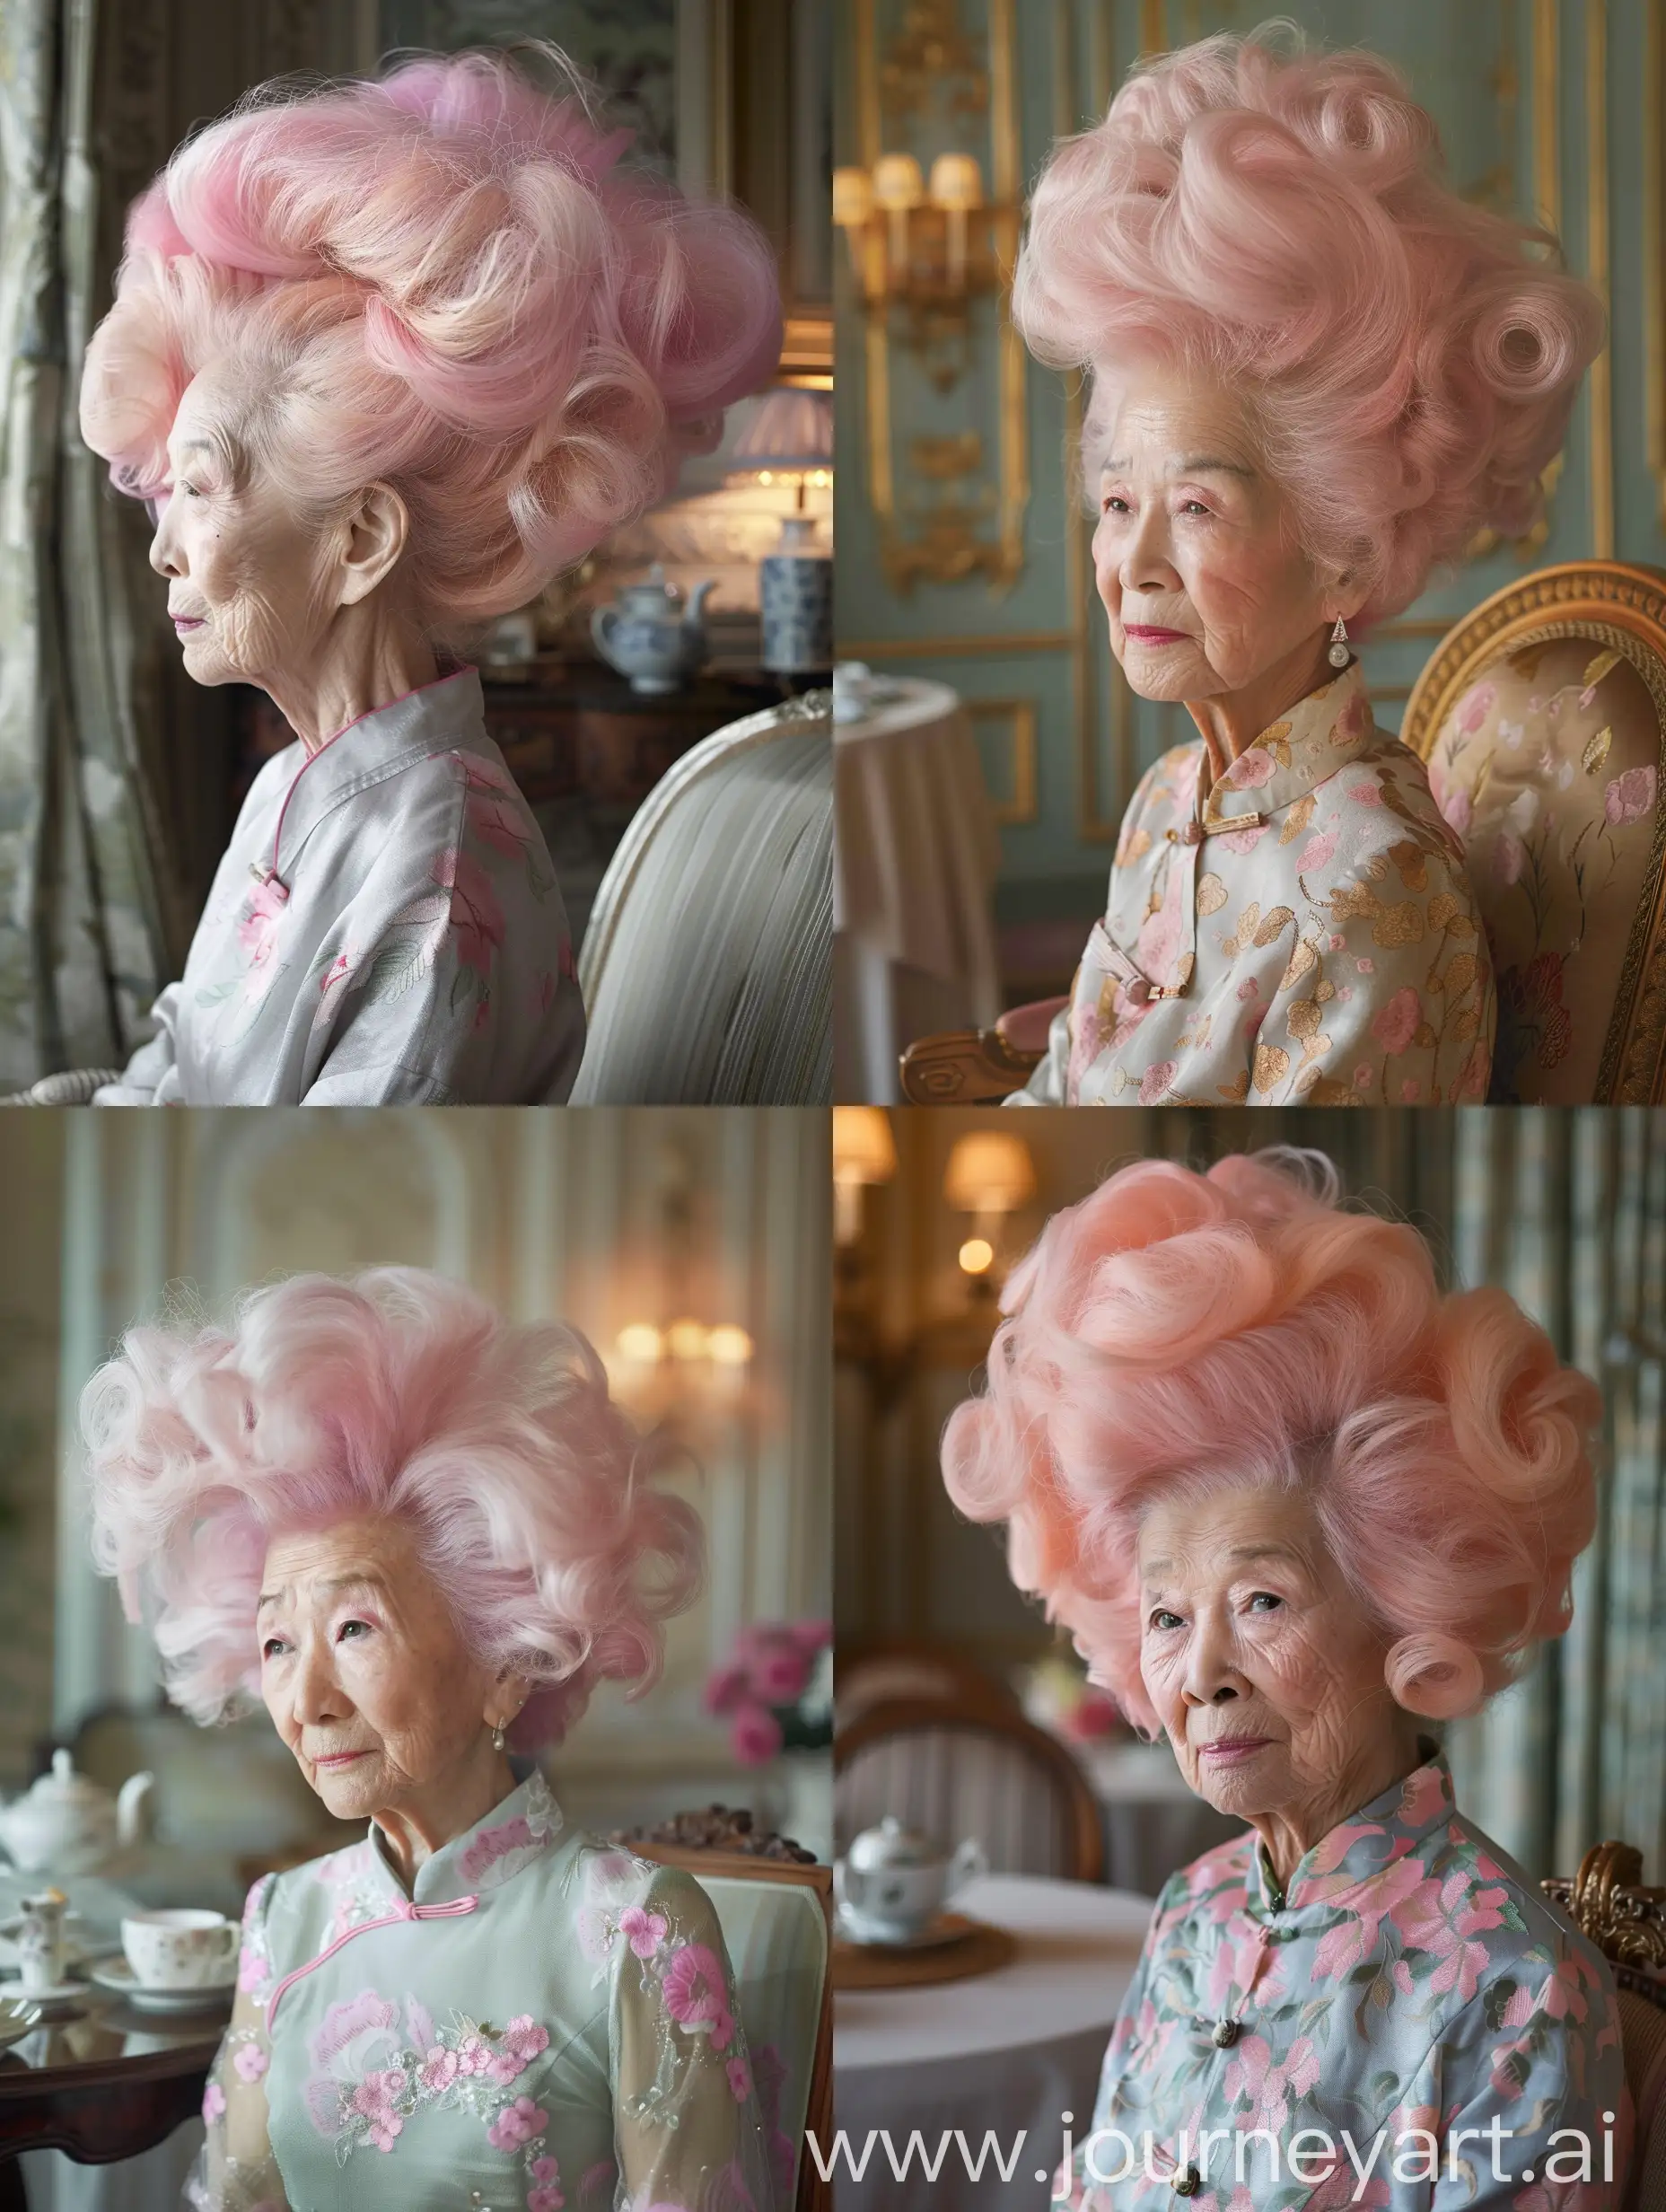 An elderly Asian woman with elegant pastel pink tones in her hair, styled in a sophisticated updo. She is seated in a classic tea room, surrounded by soft, diffused lighting that highlights her graceful style.